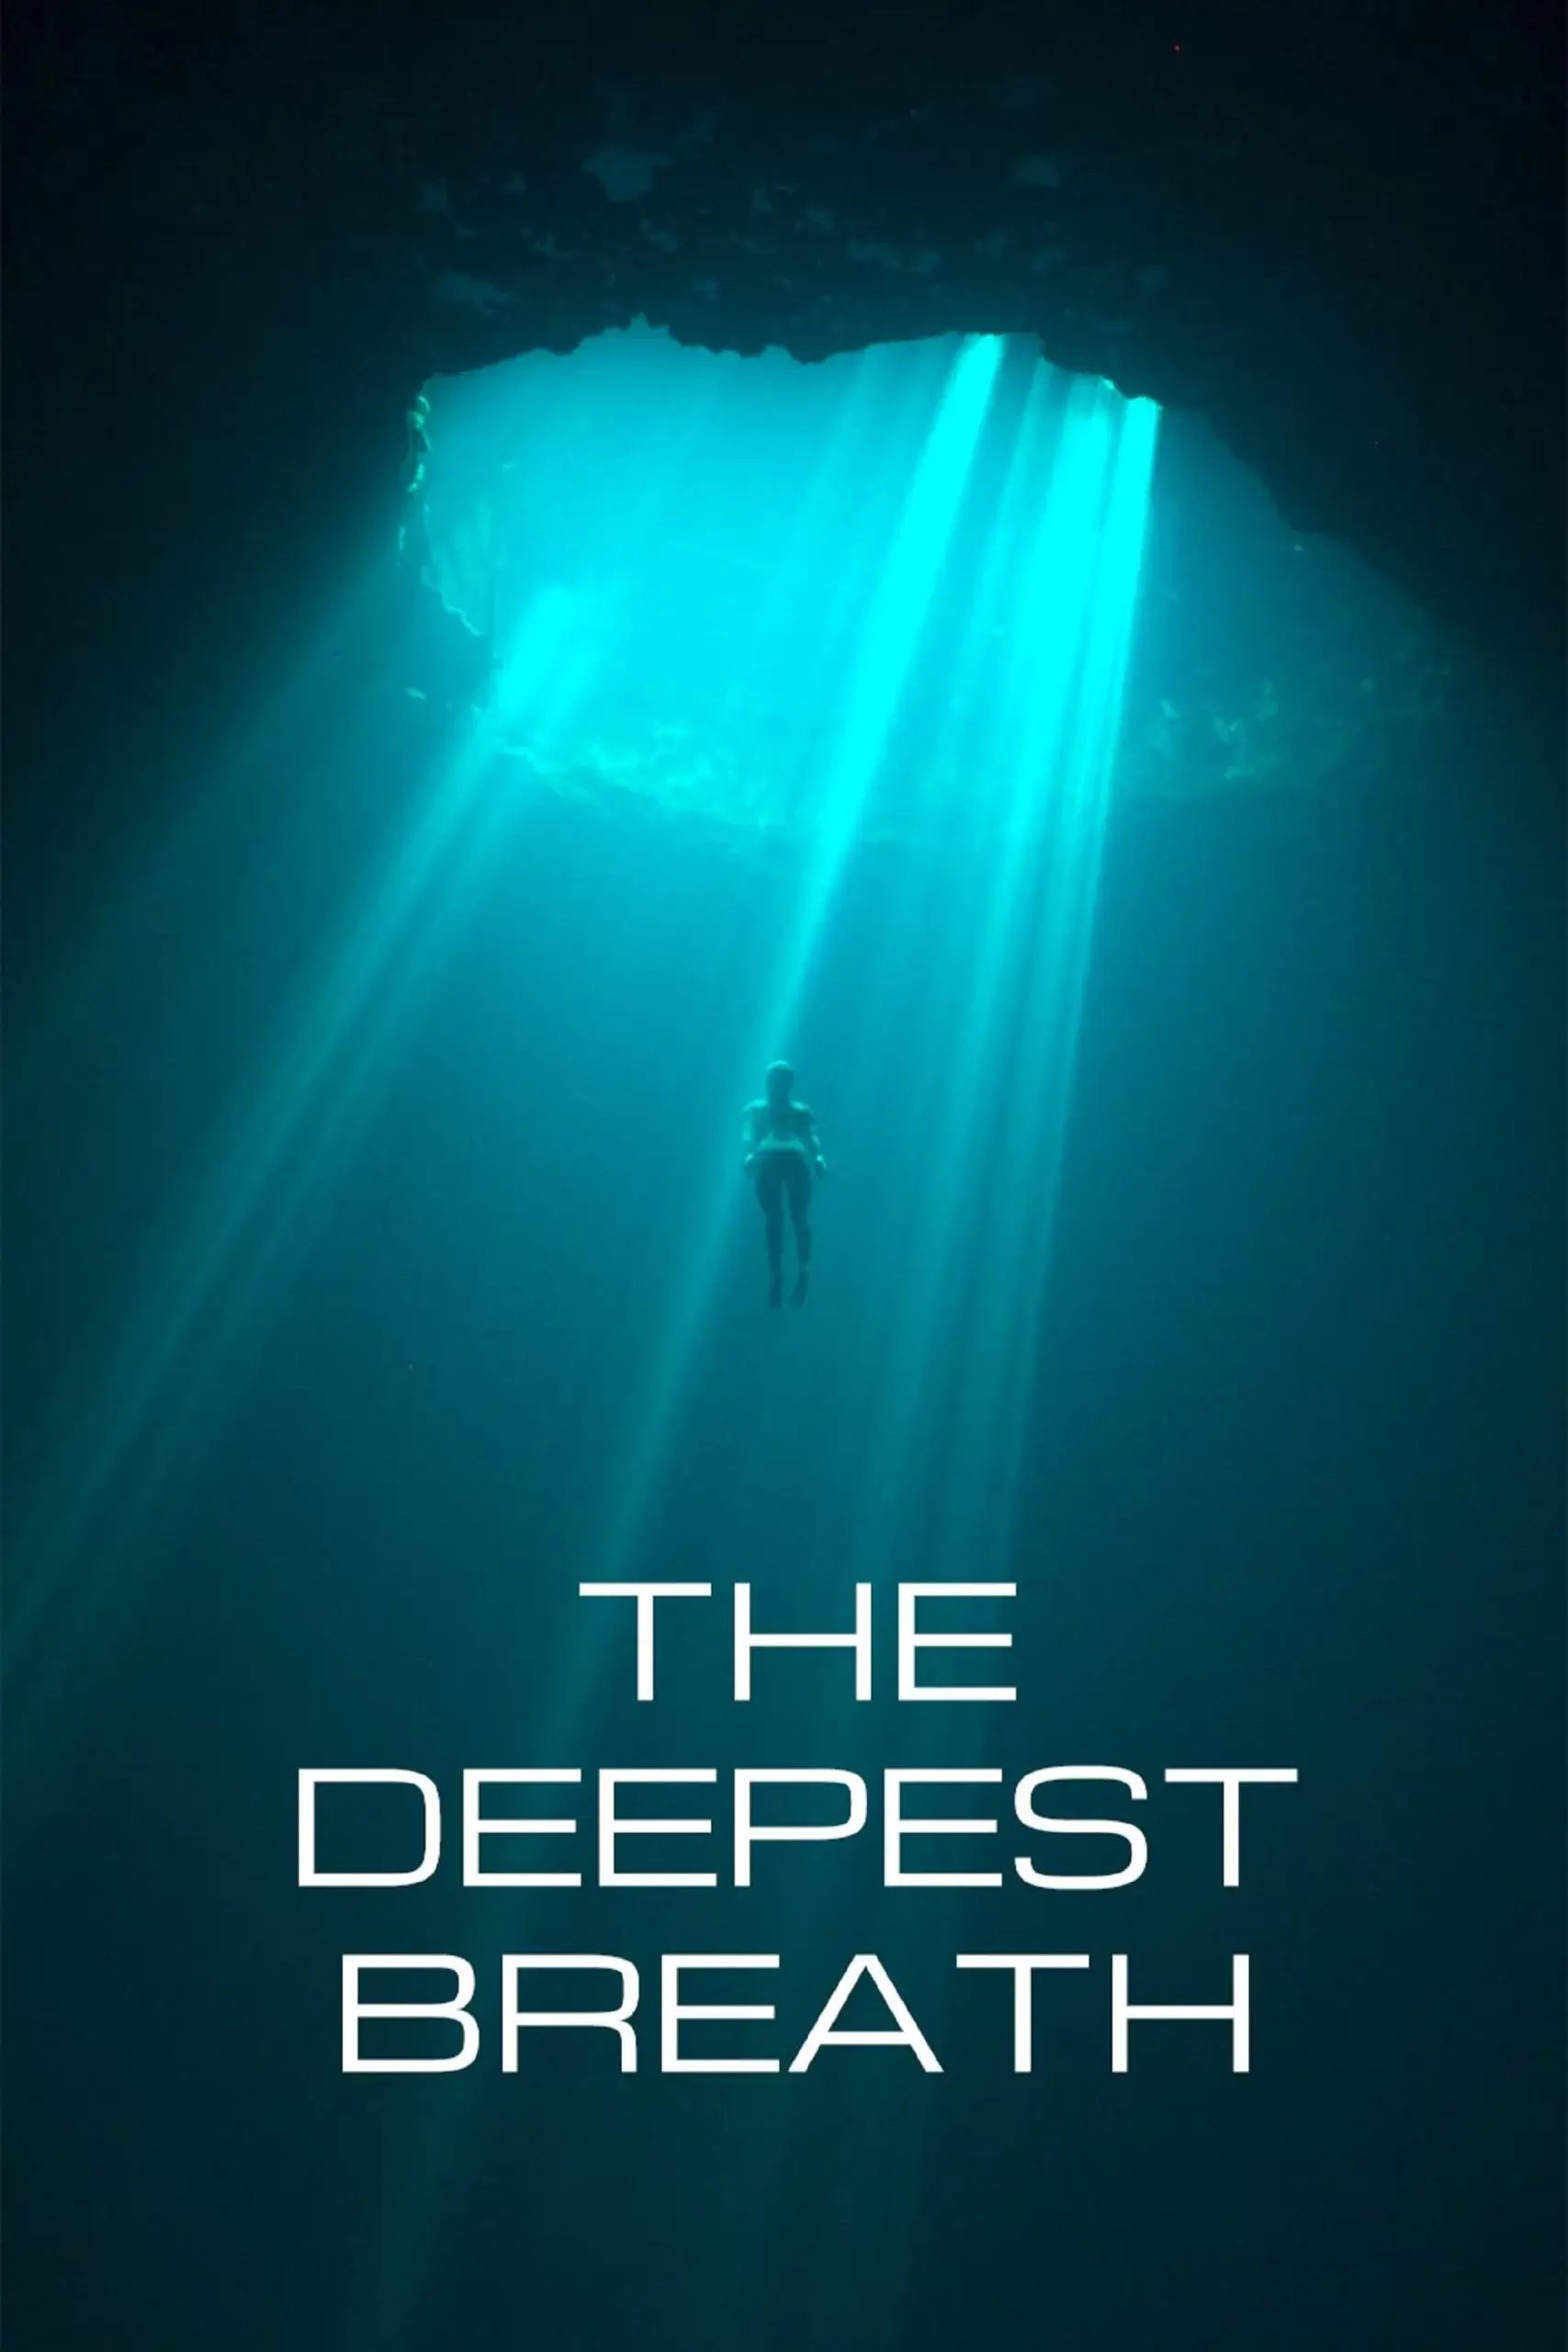 the deepest breath documentary poster